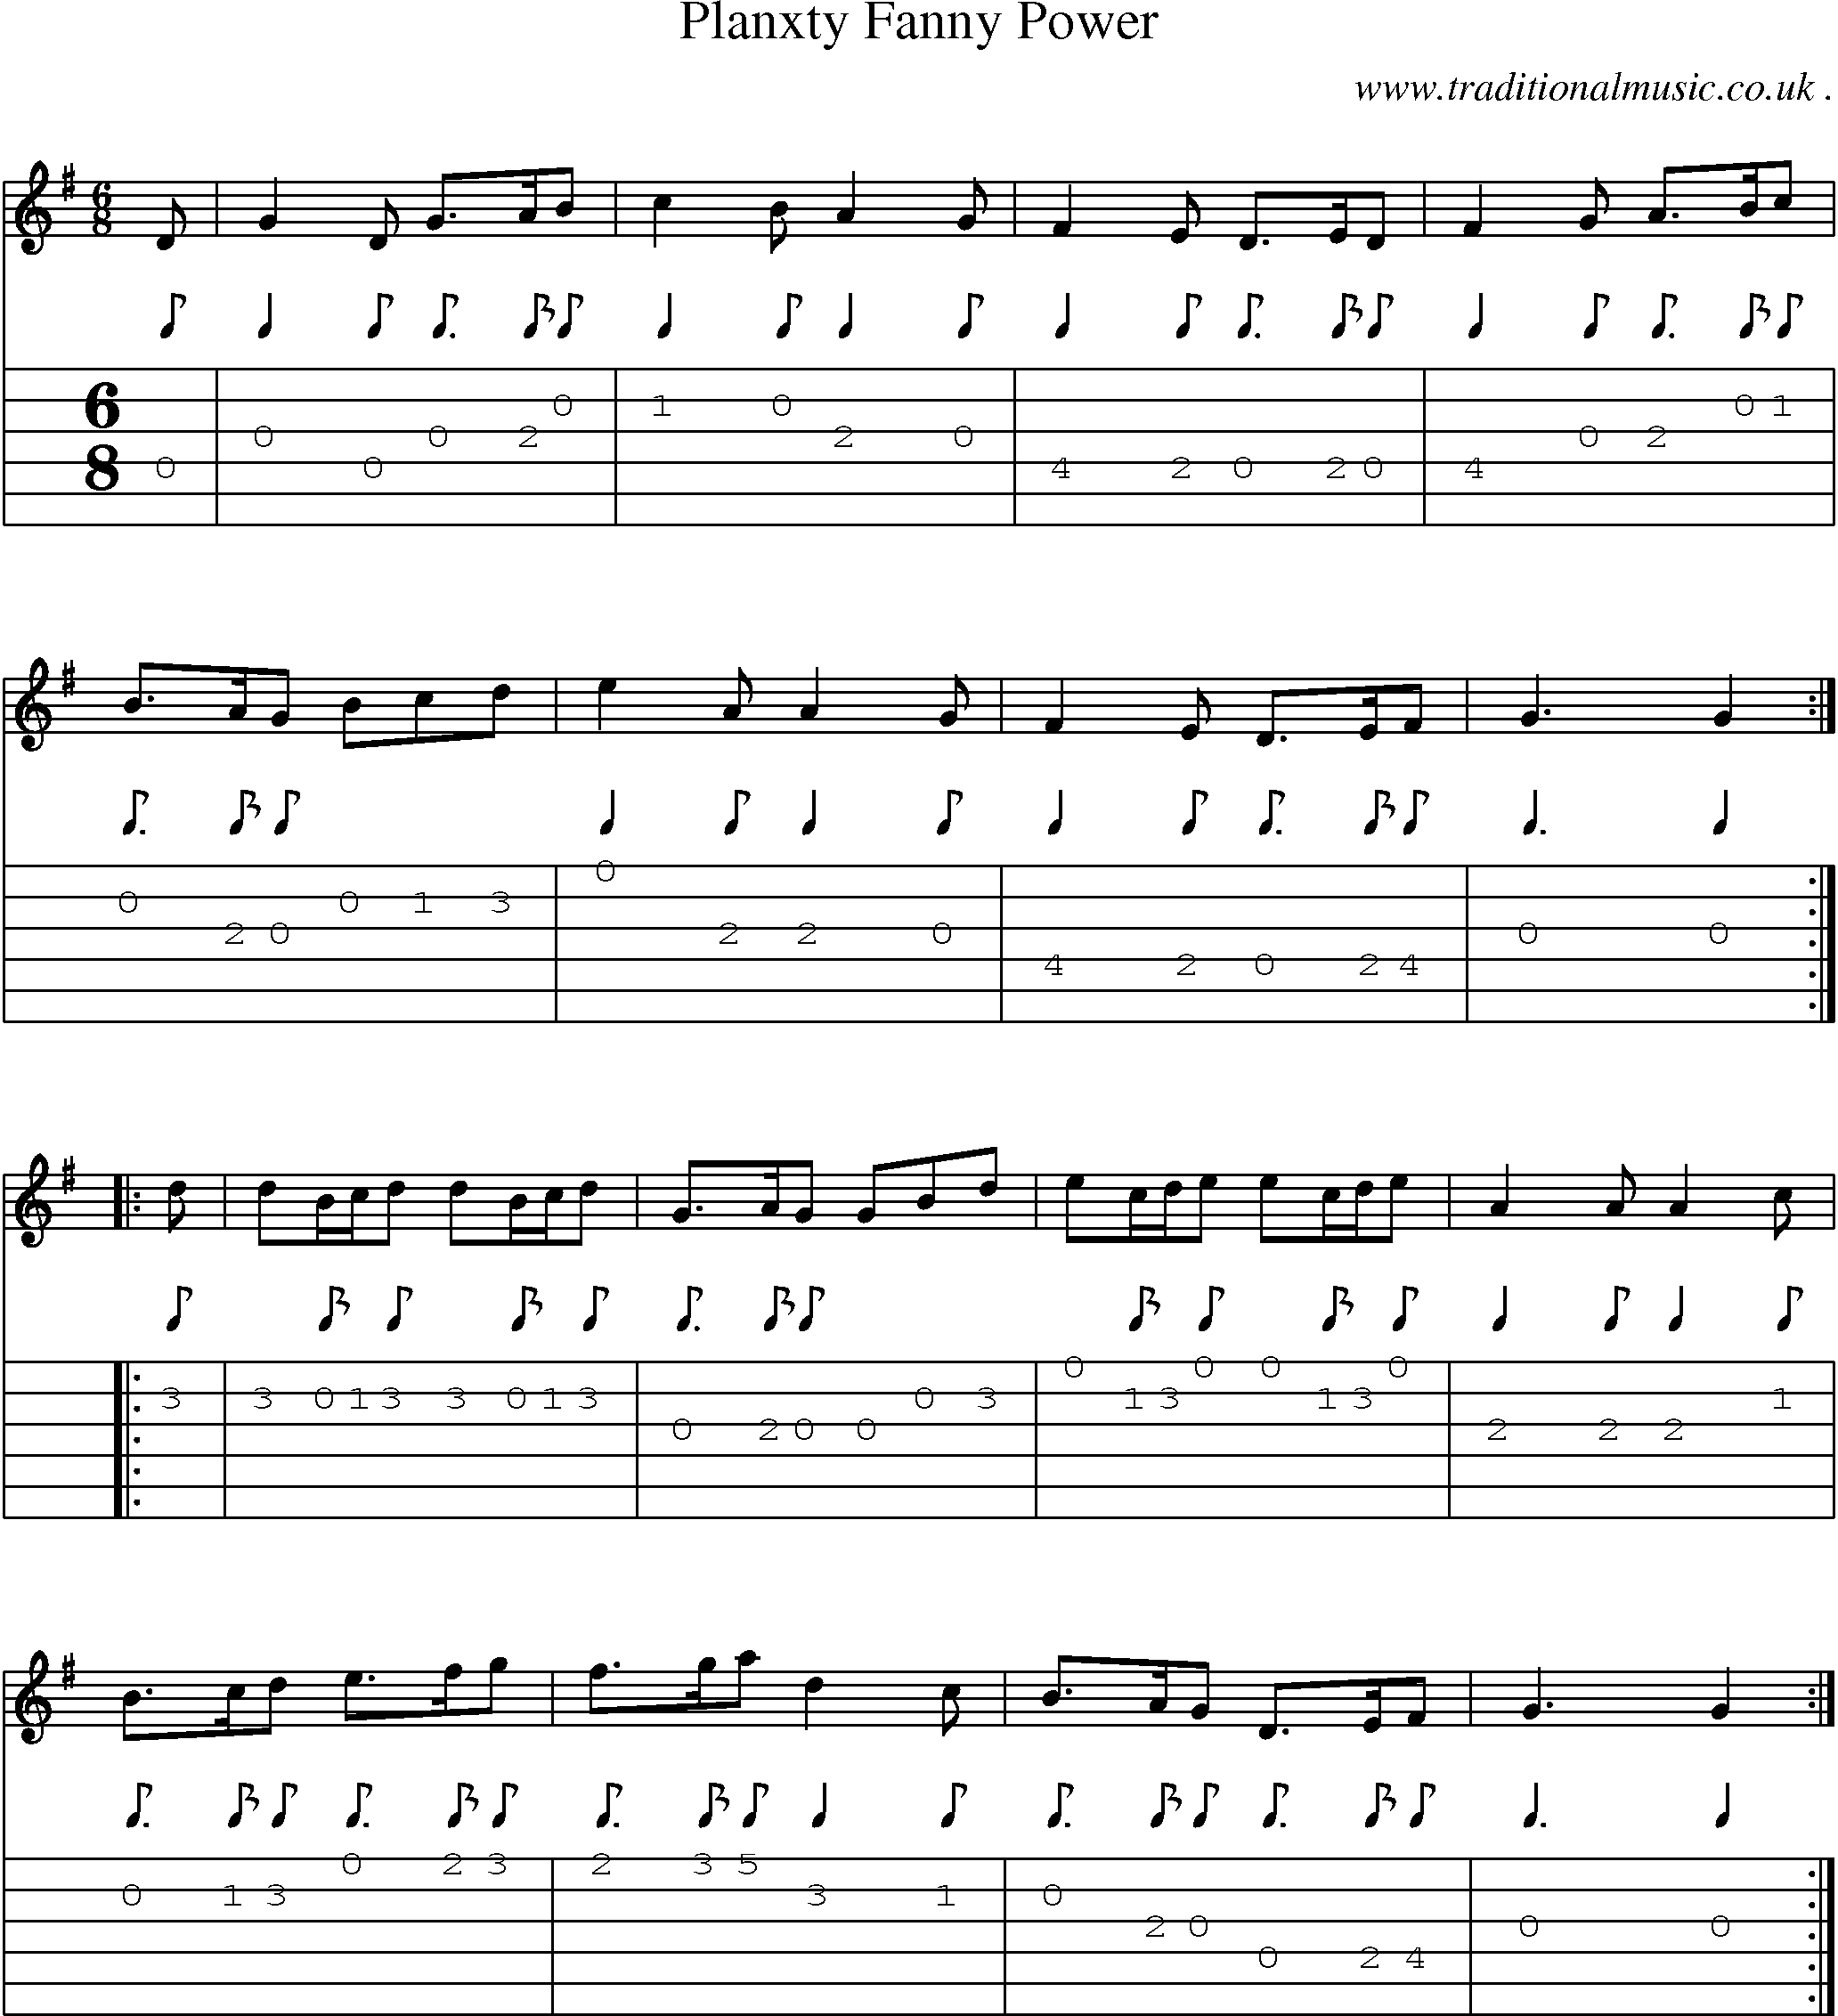 Sheet-Music and Guitar Tabs for Planxty Fanny Power